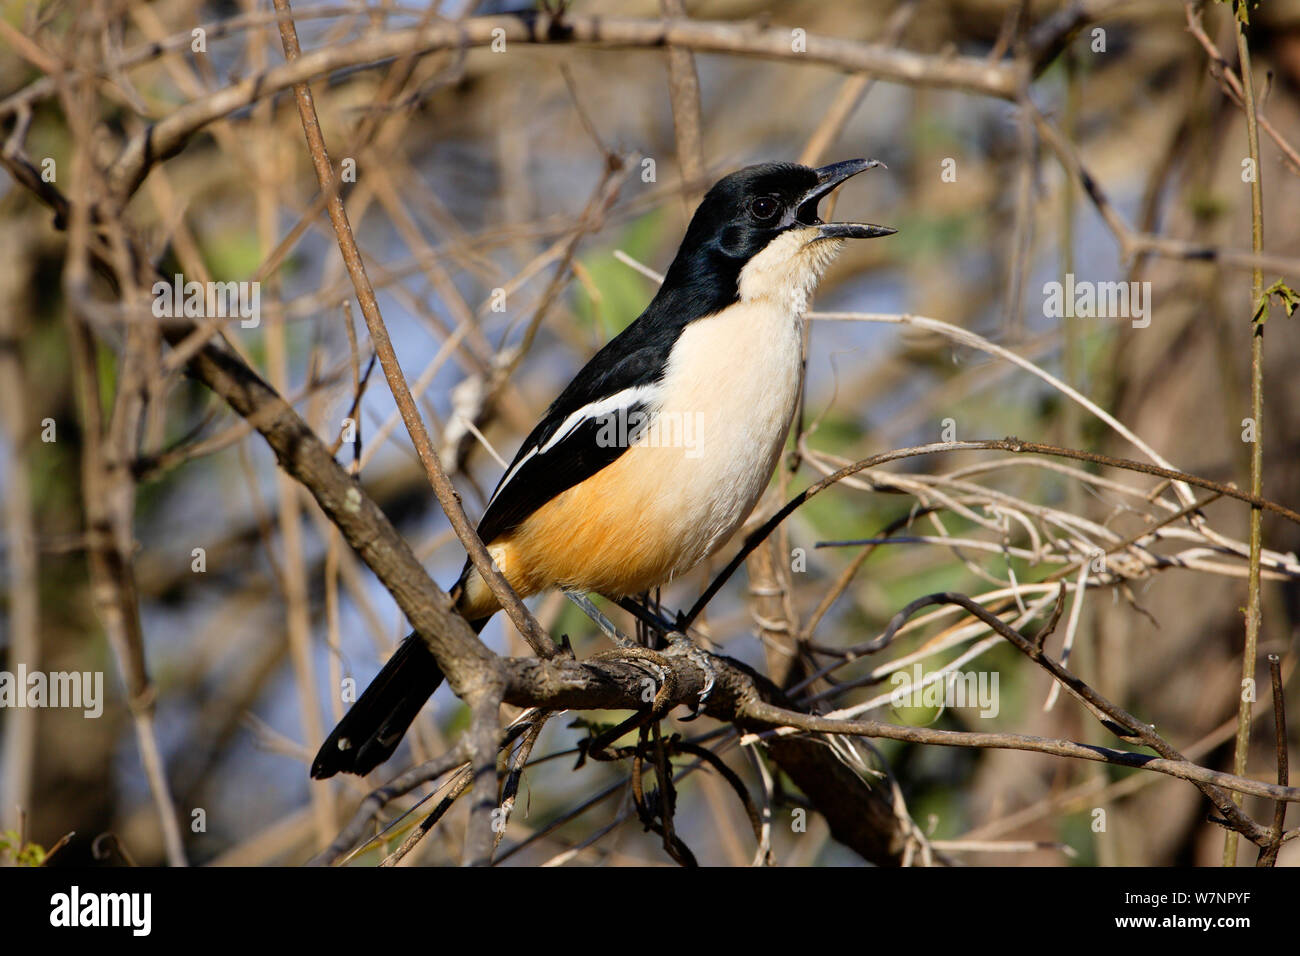 Southern Boubou (Laniarius ferrugineus) cantare, Parco Nazionale Kruger, Transvaal, Sud Africa, Settembre. Foto Stock